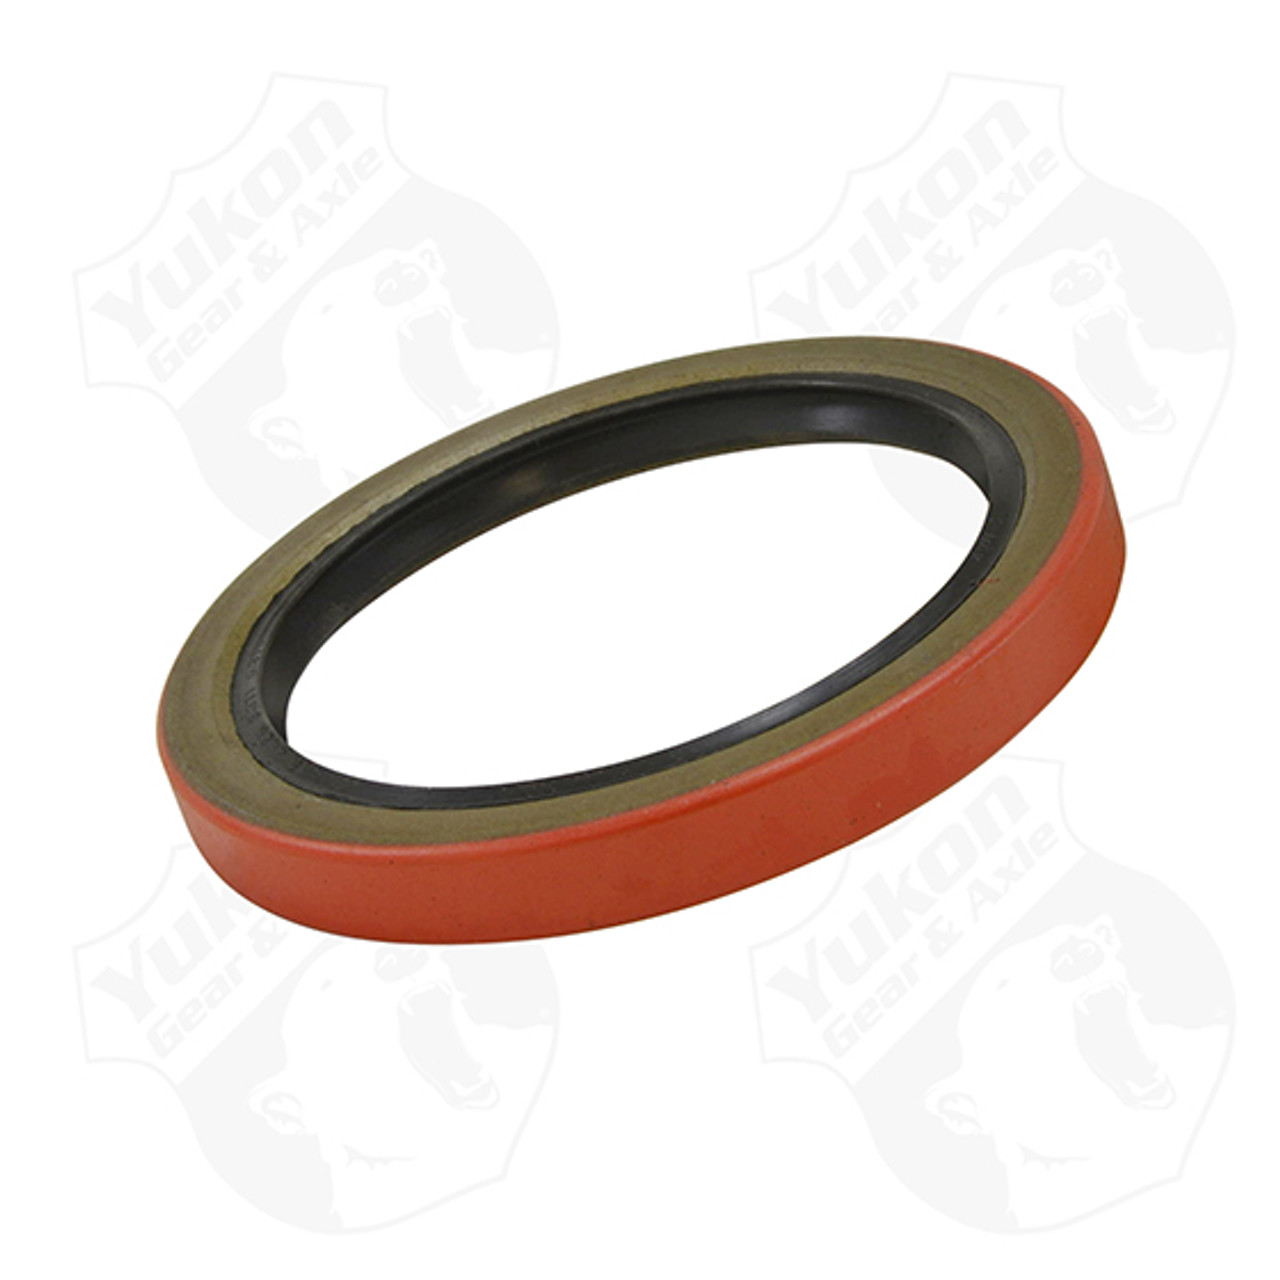 Full time inner wheel replacement seal for Dana 44 Dodge 4WD front.